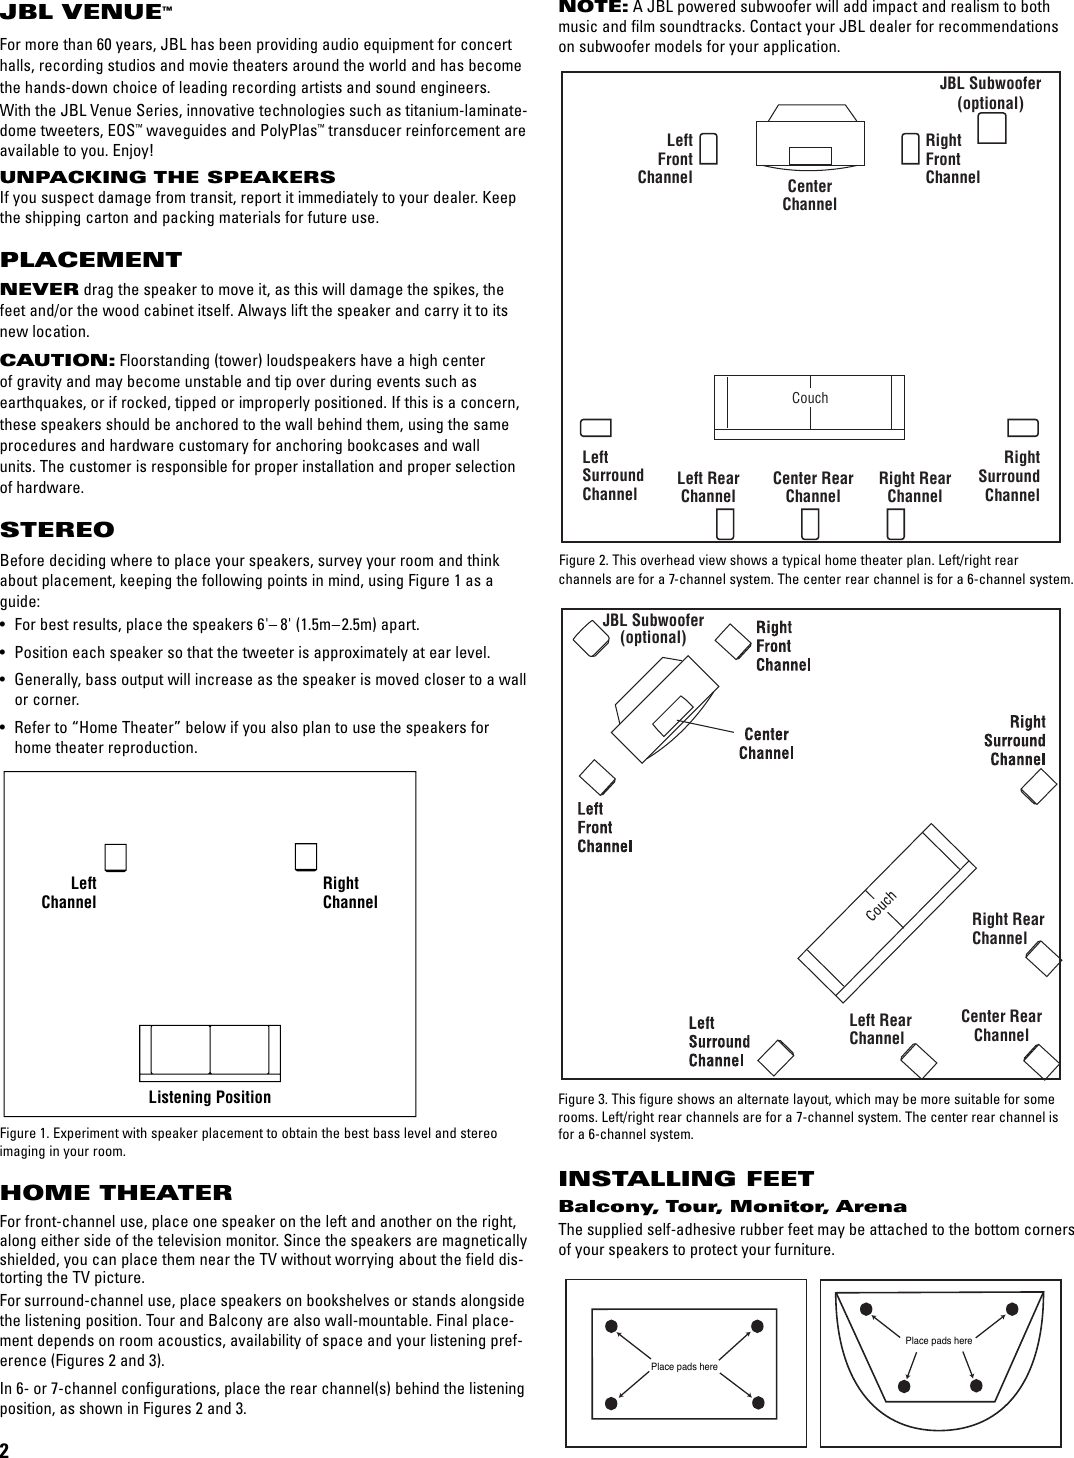 Page 2 of 4 - Bose Speakers Venue Series OM User Manual  To The B595ee75-ed94-438e-8fa3-88975d95f668